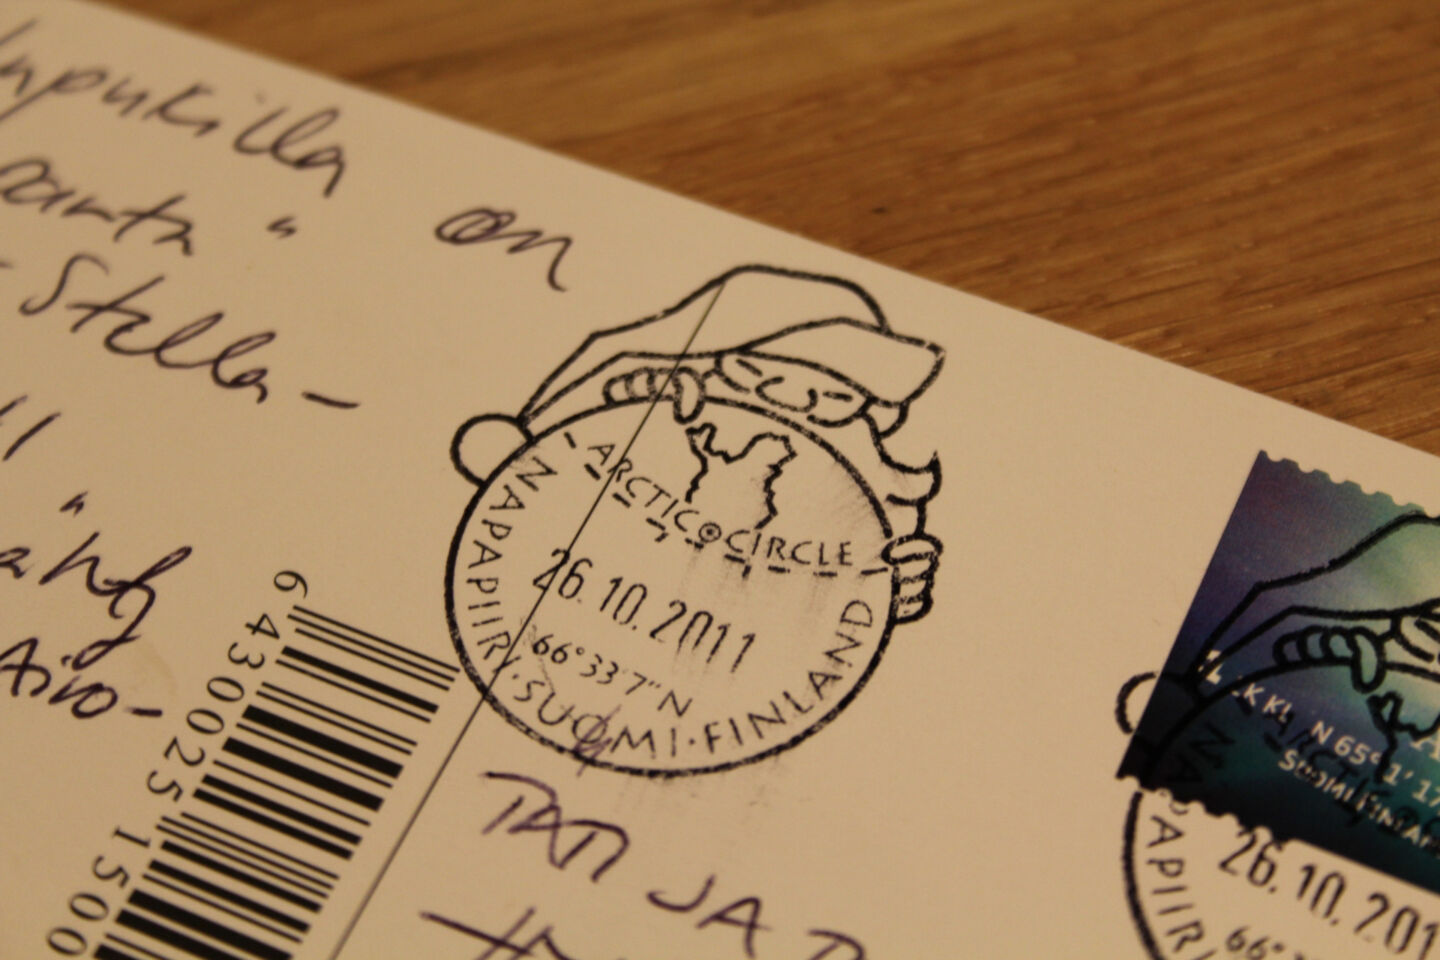 The official Arctic Circle stamp, available only from the Santa Claus Main Post Office at Santa Claus Village in Rovaniemi, Finland